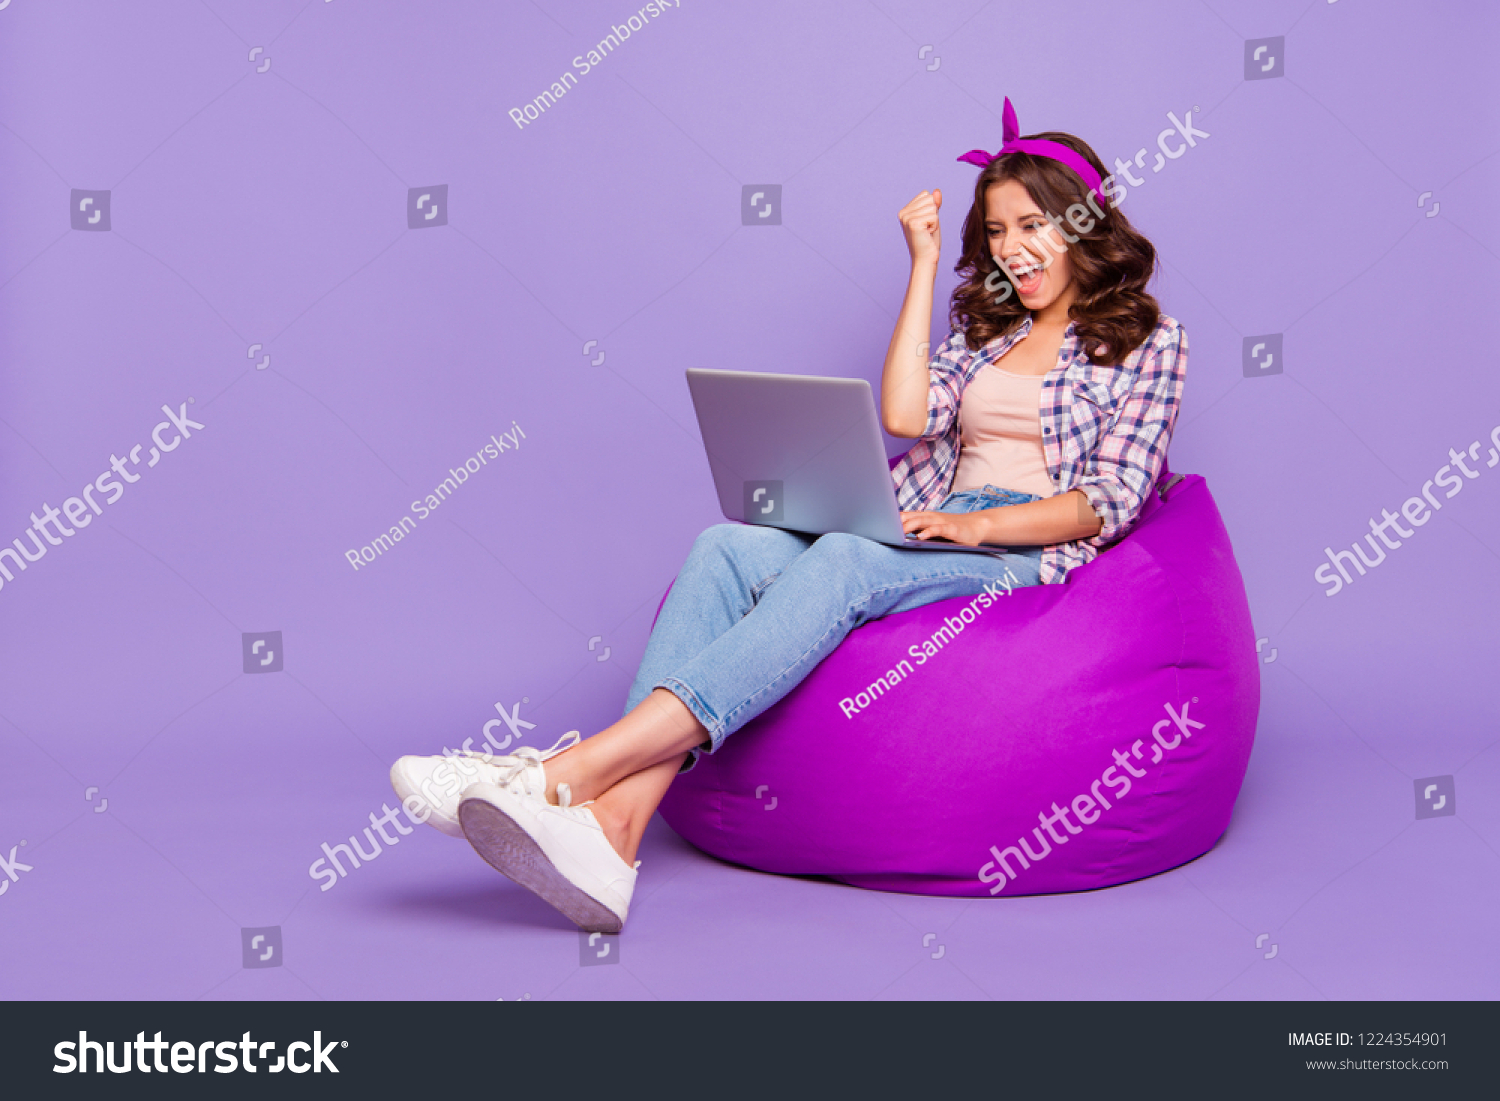 Full size portrait of lady in checkered shirt denim jeans her brunette curly wave style stylish hair she sit isolated on violet purple trendy background work on notebook open mouth raised fist up #1224354901